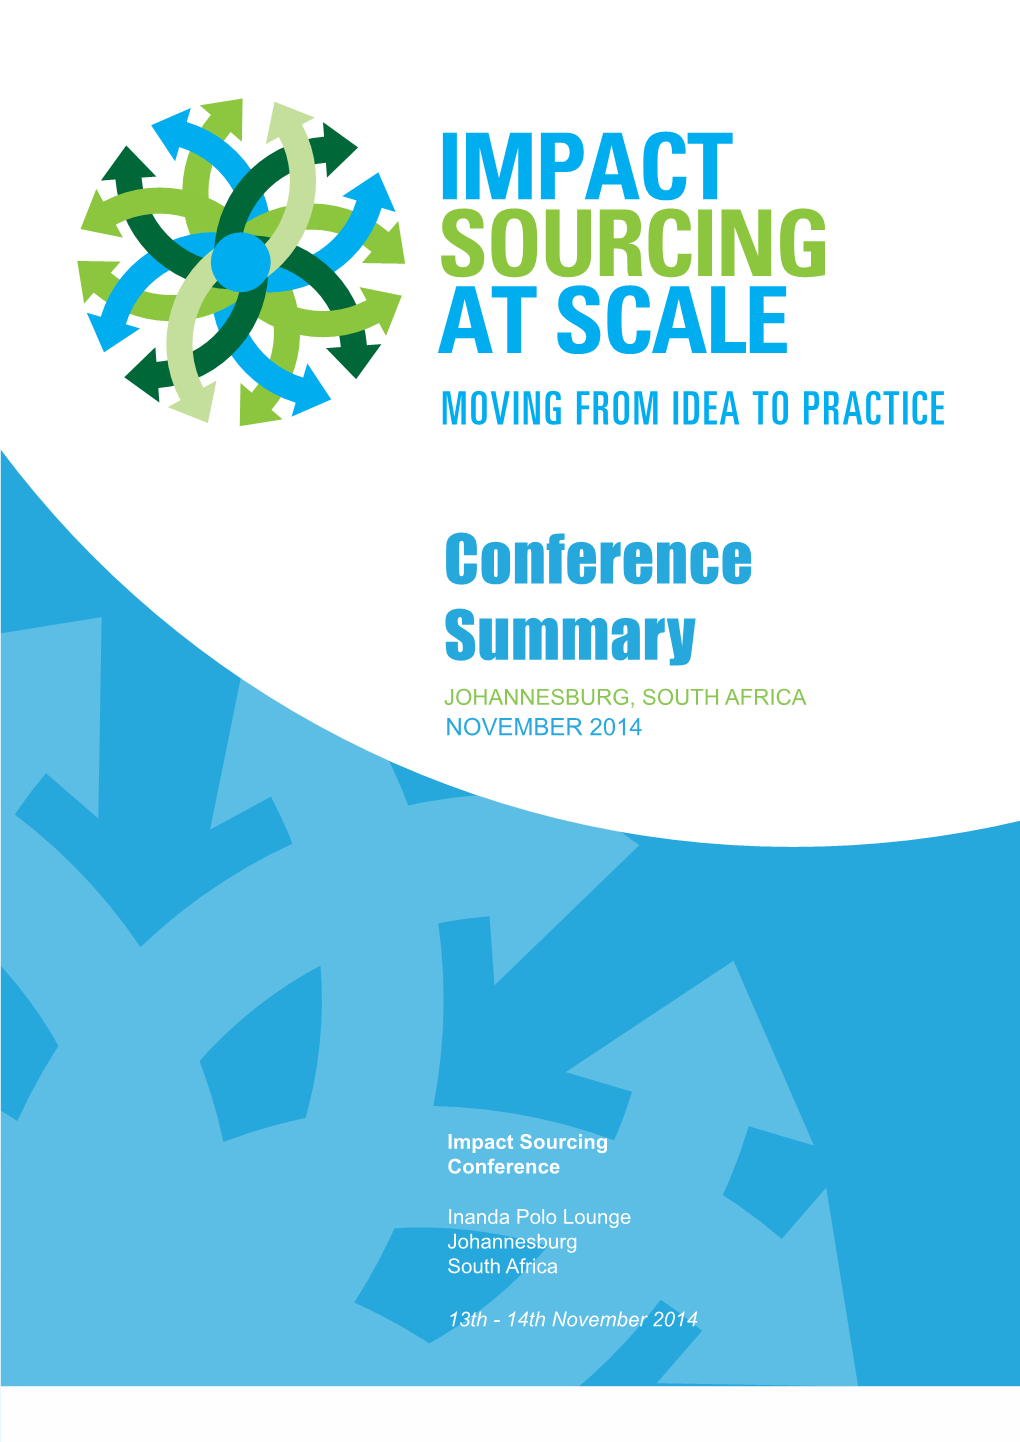 Conference Summary JOHANNESBURG, SOUTH AFRICA November 2014